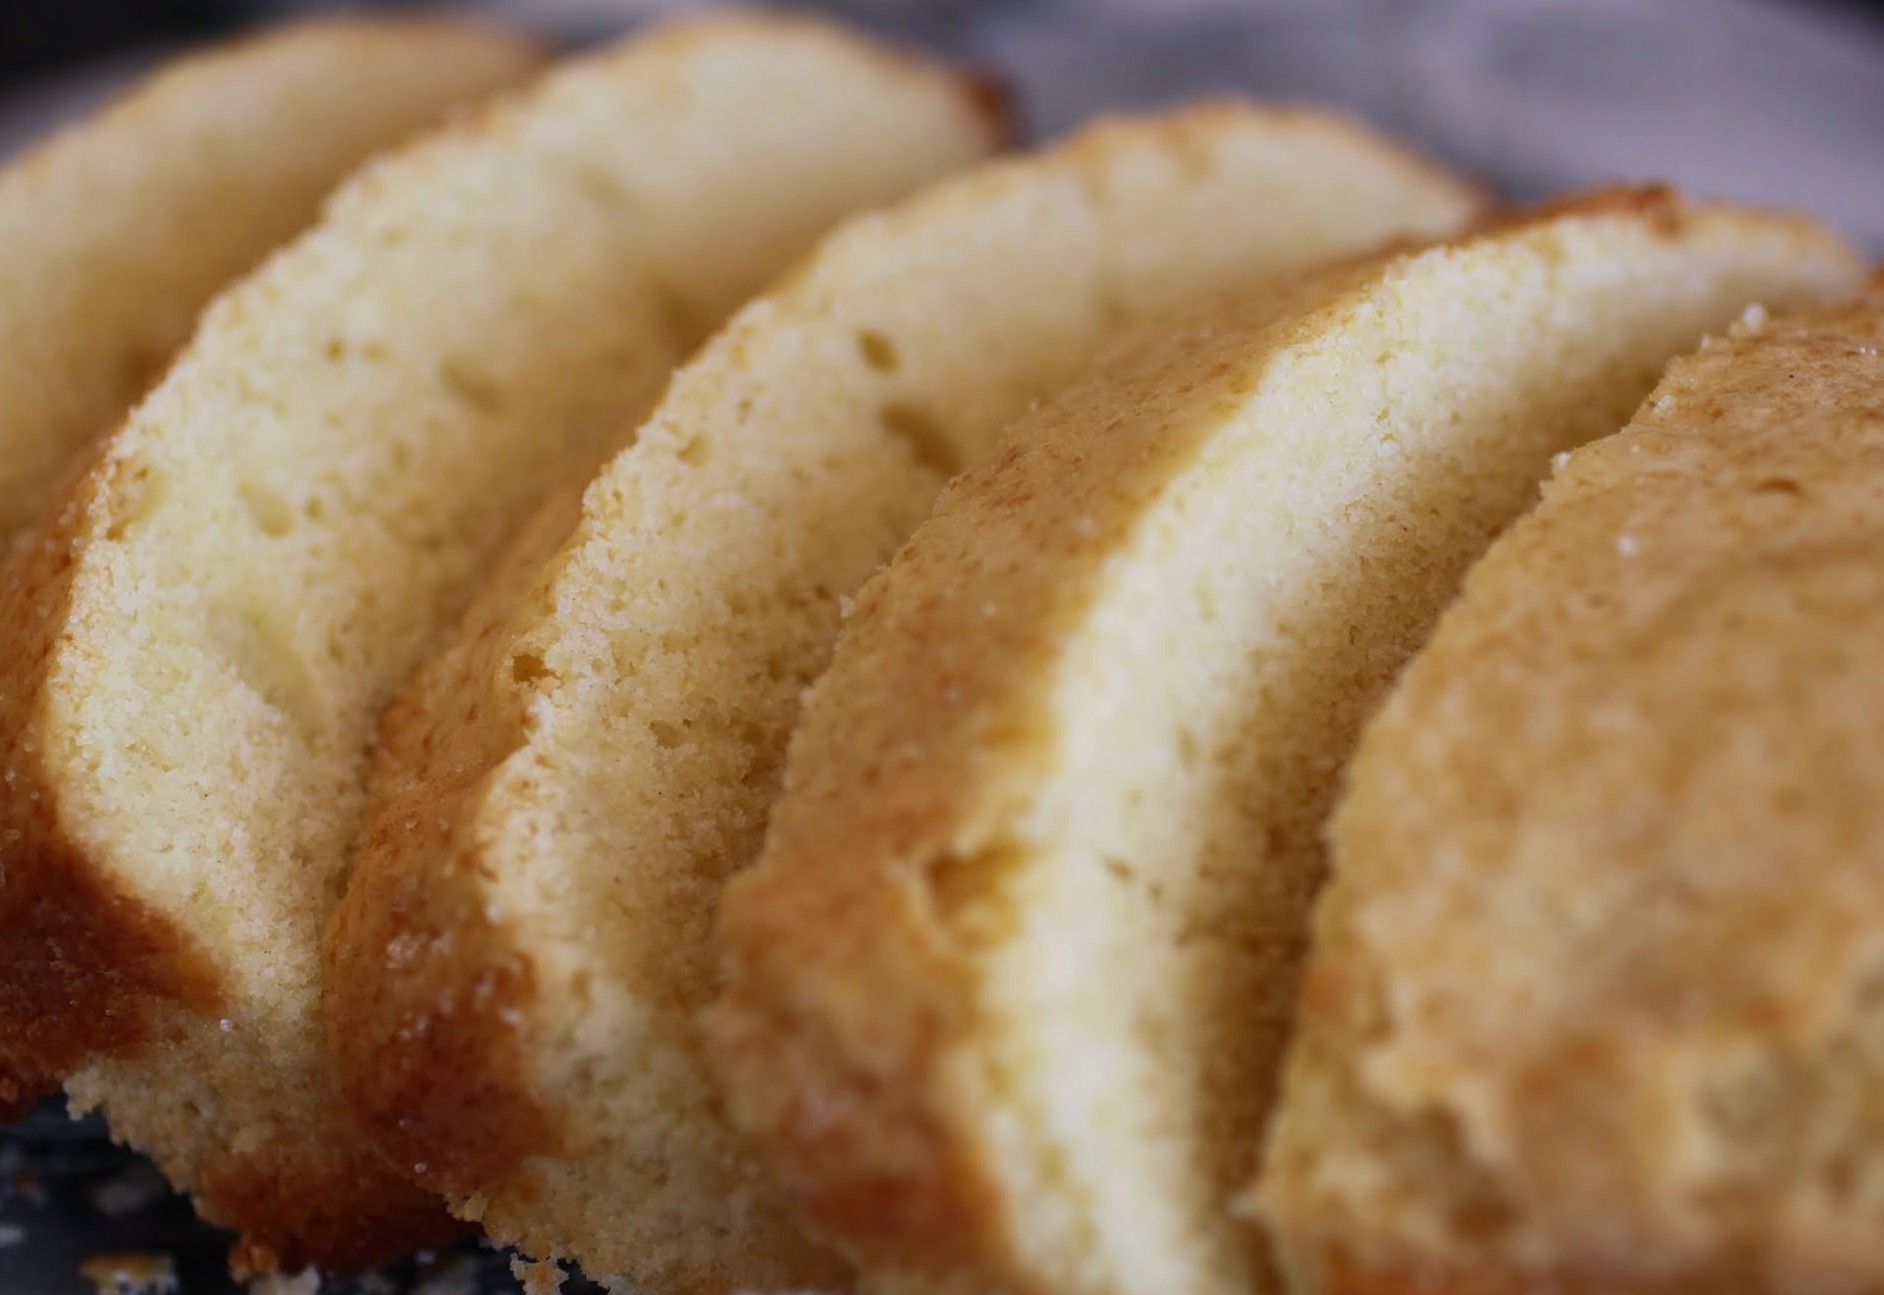 Browned Butter Half-Pound Cake